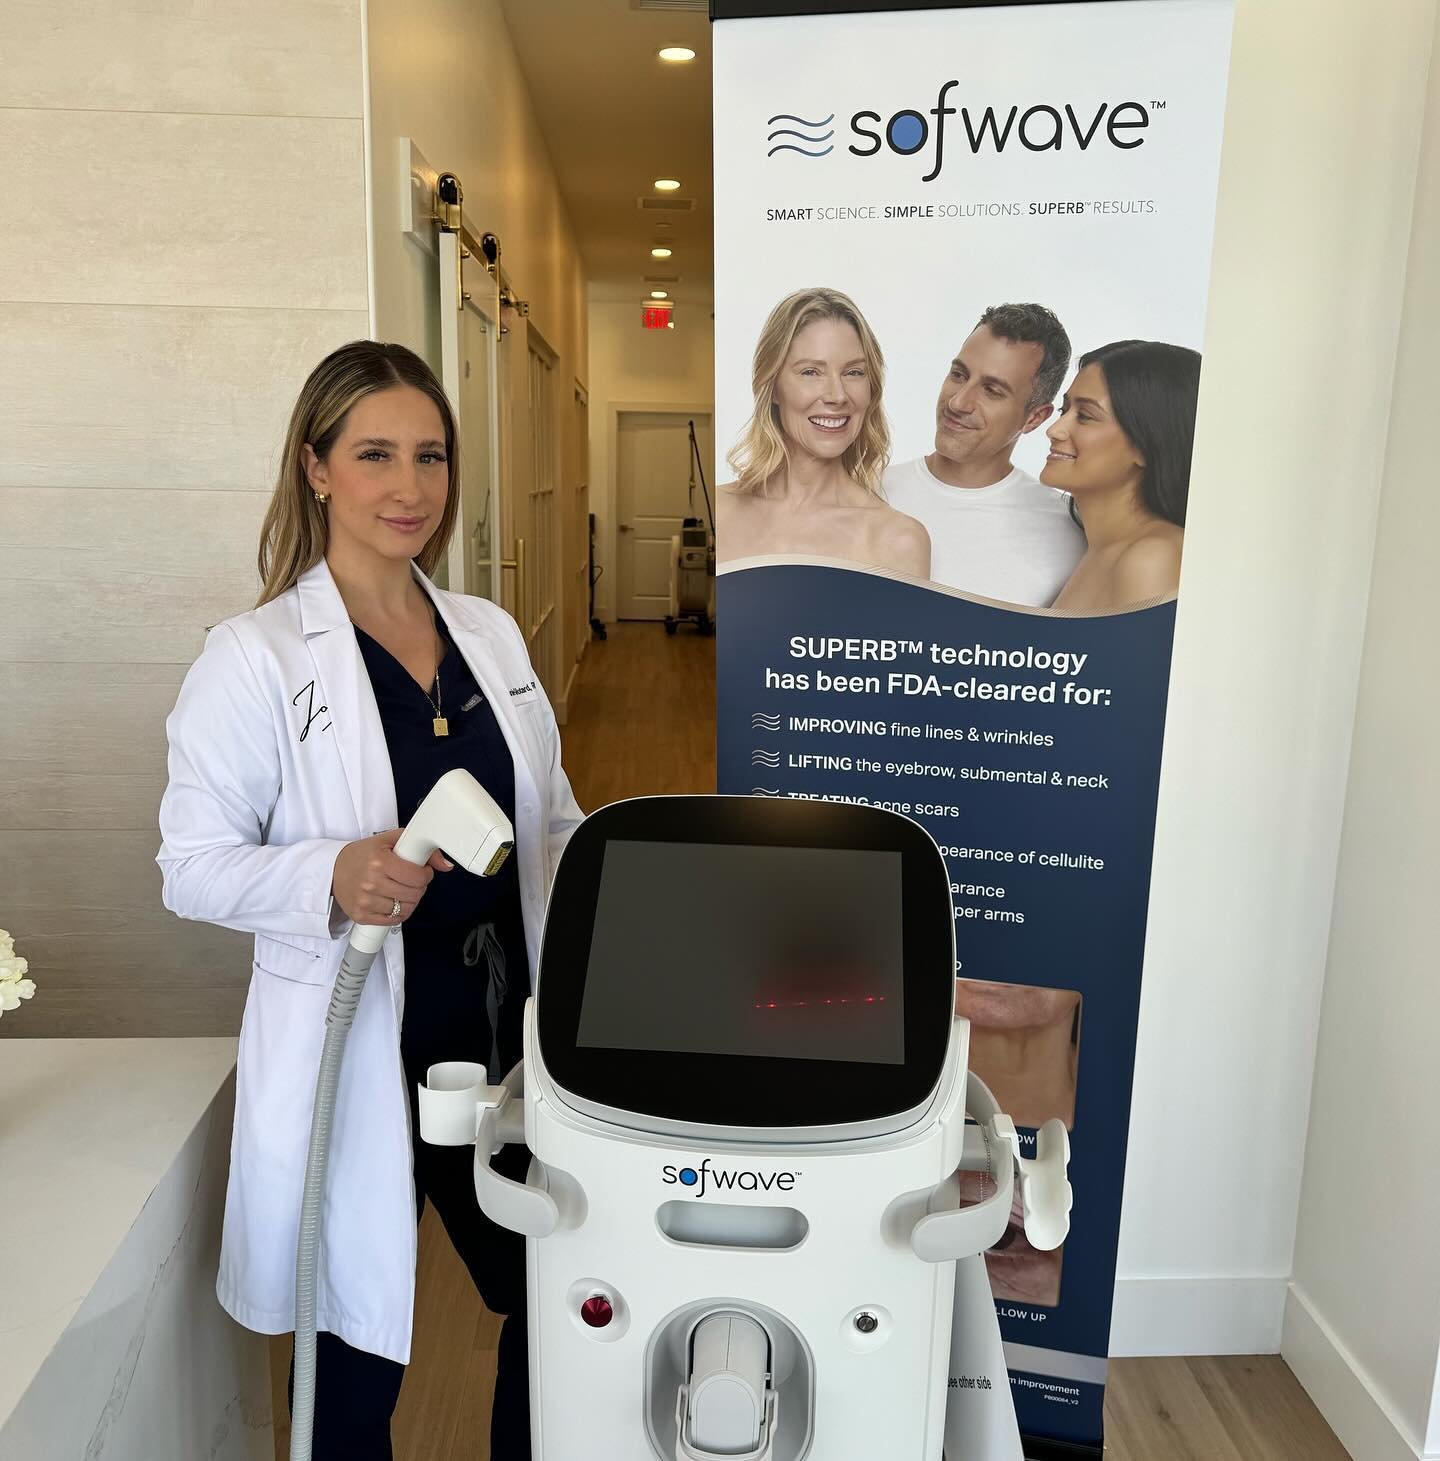 ✨NEW SERVICE ALERT✨

Experience the future of skincare with Sofwave: where science meets beauty for radiant, age-defying results. 

Sofwave is an FDA cleared, non-invasive treatment of fine lines and wrinkles using a next generation SUPERB Synchronou